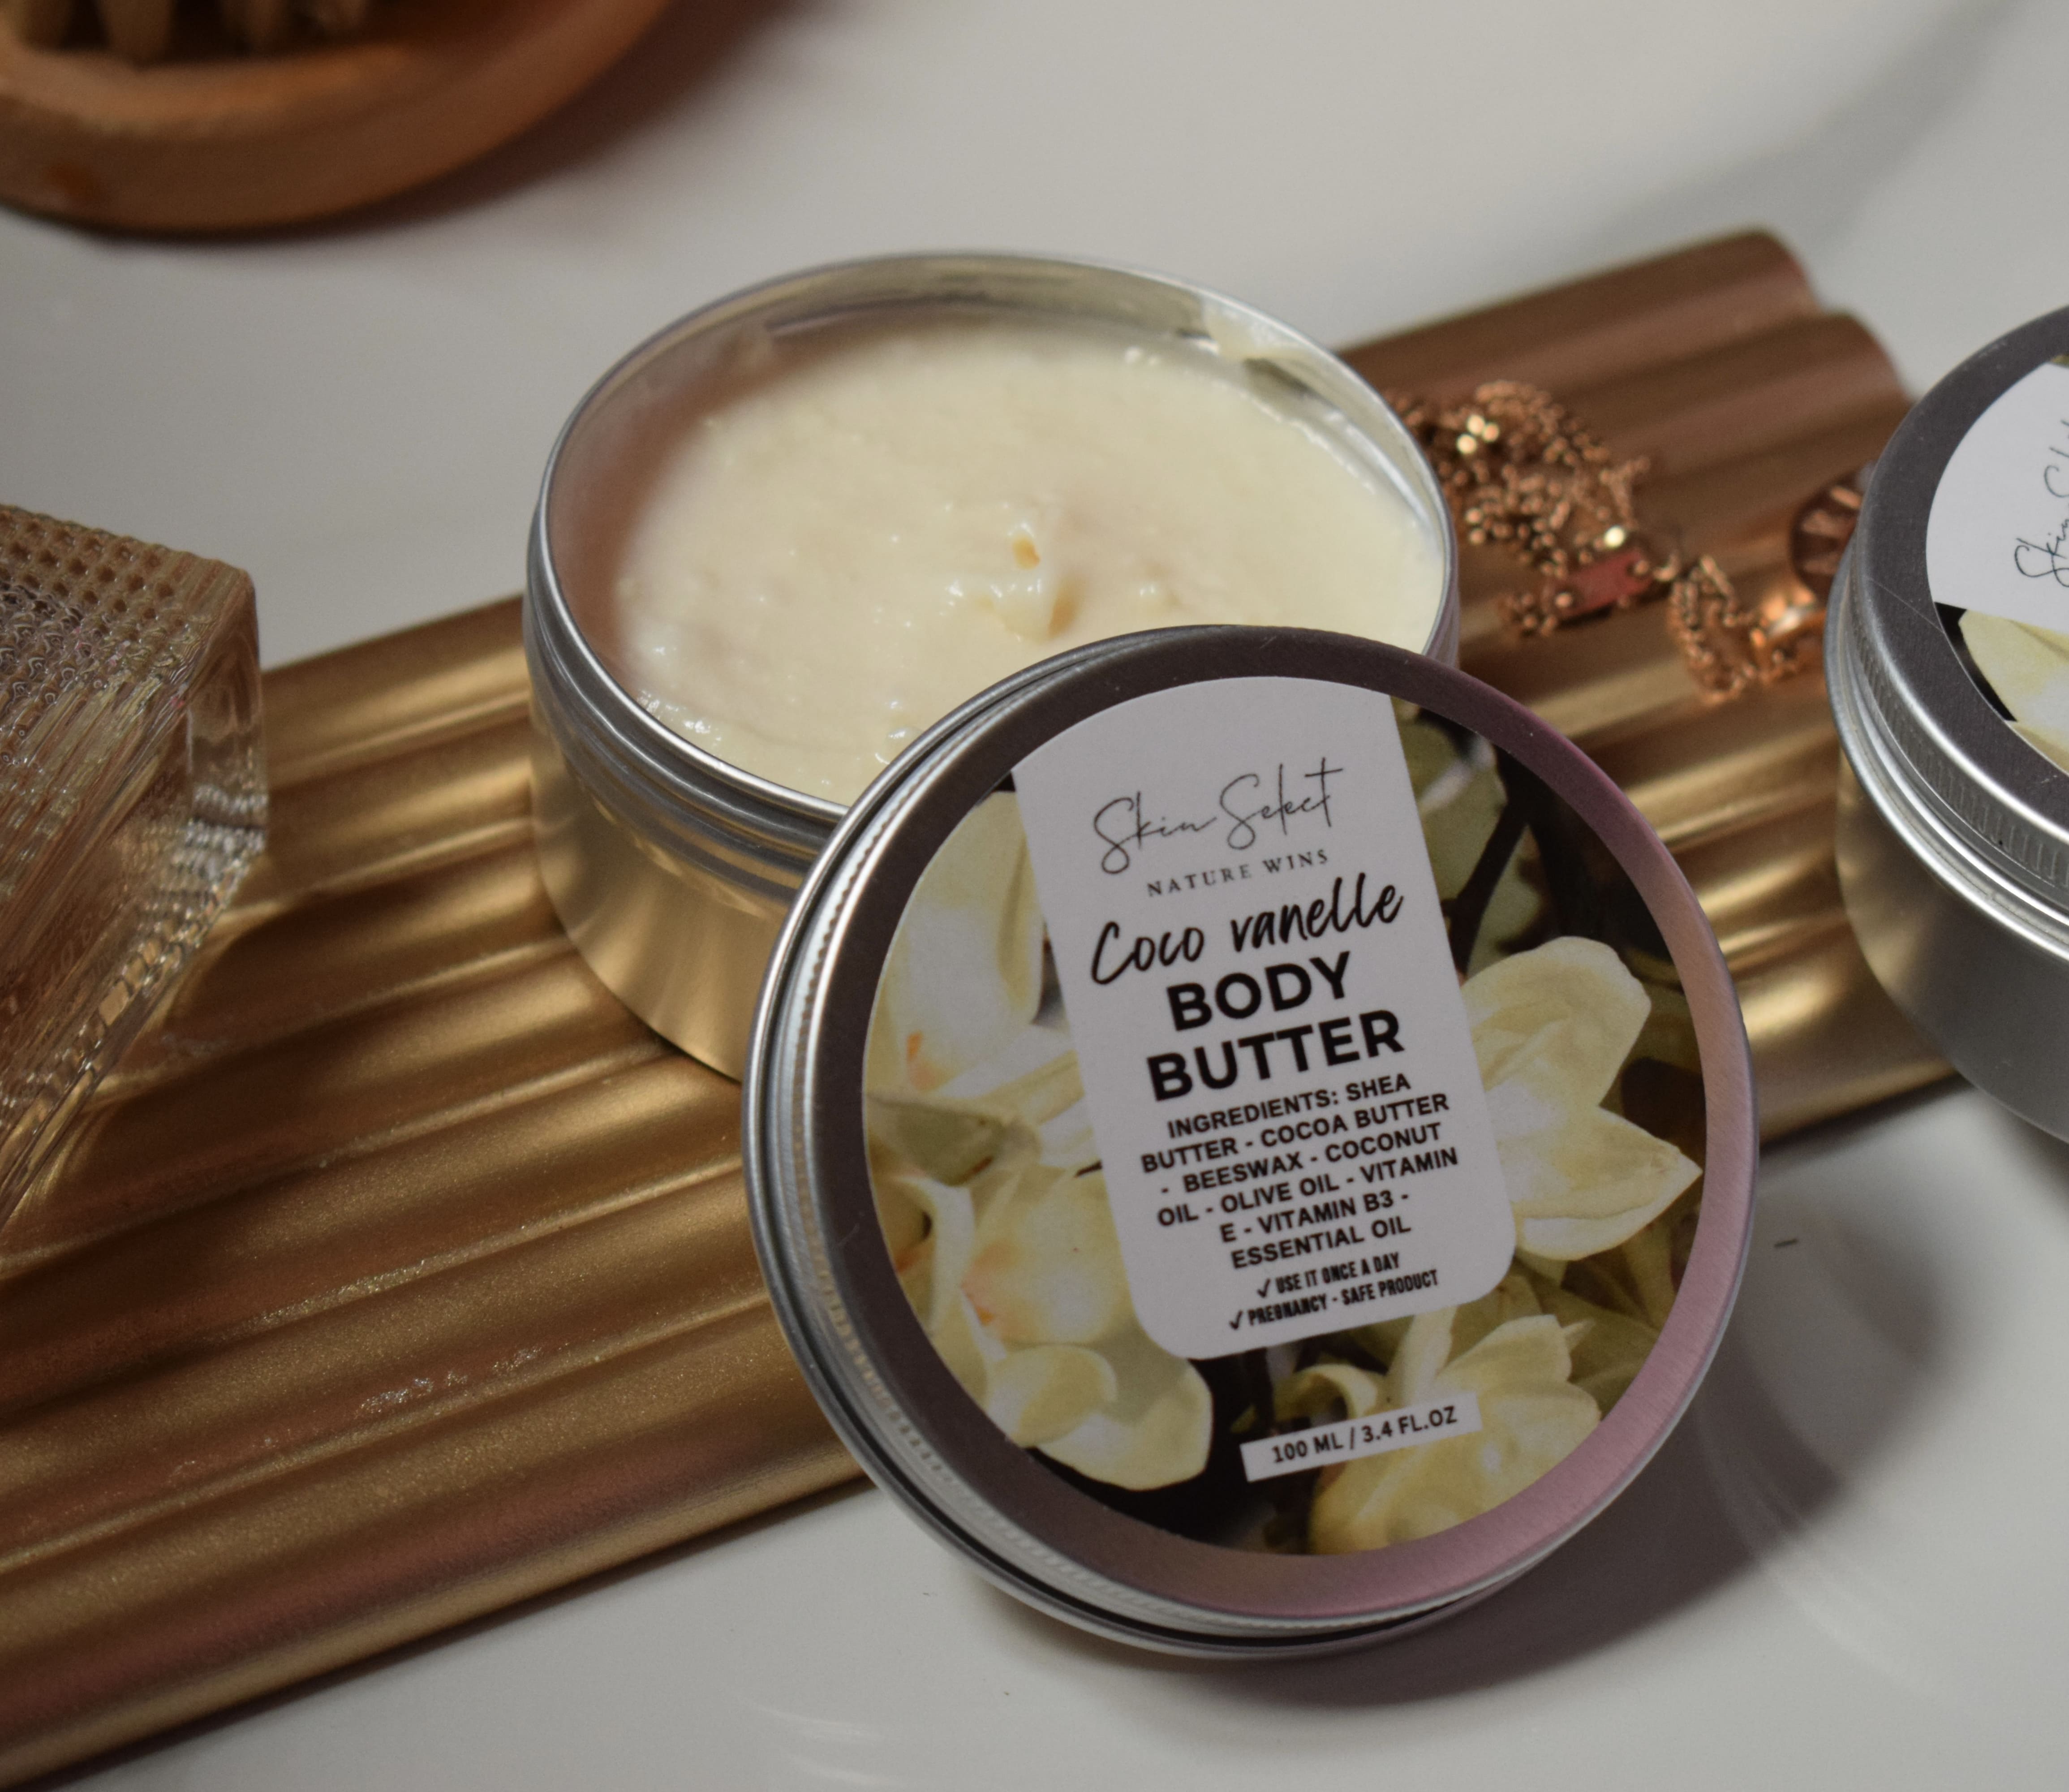 Coco vanelle body butter